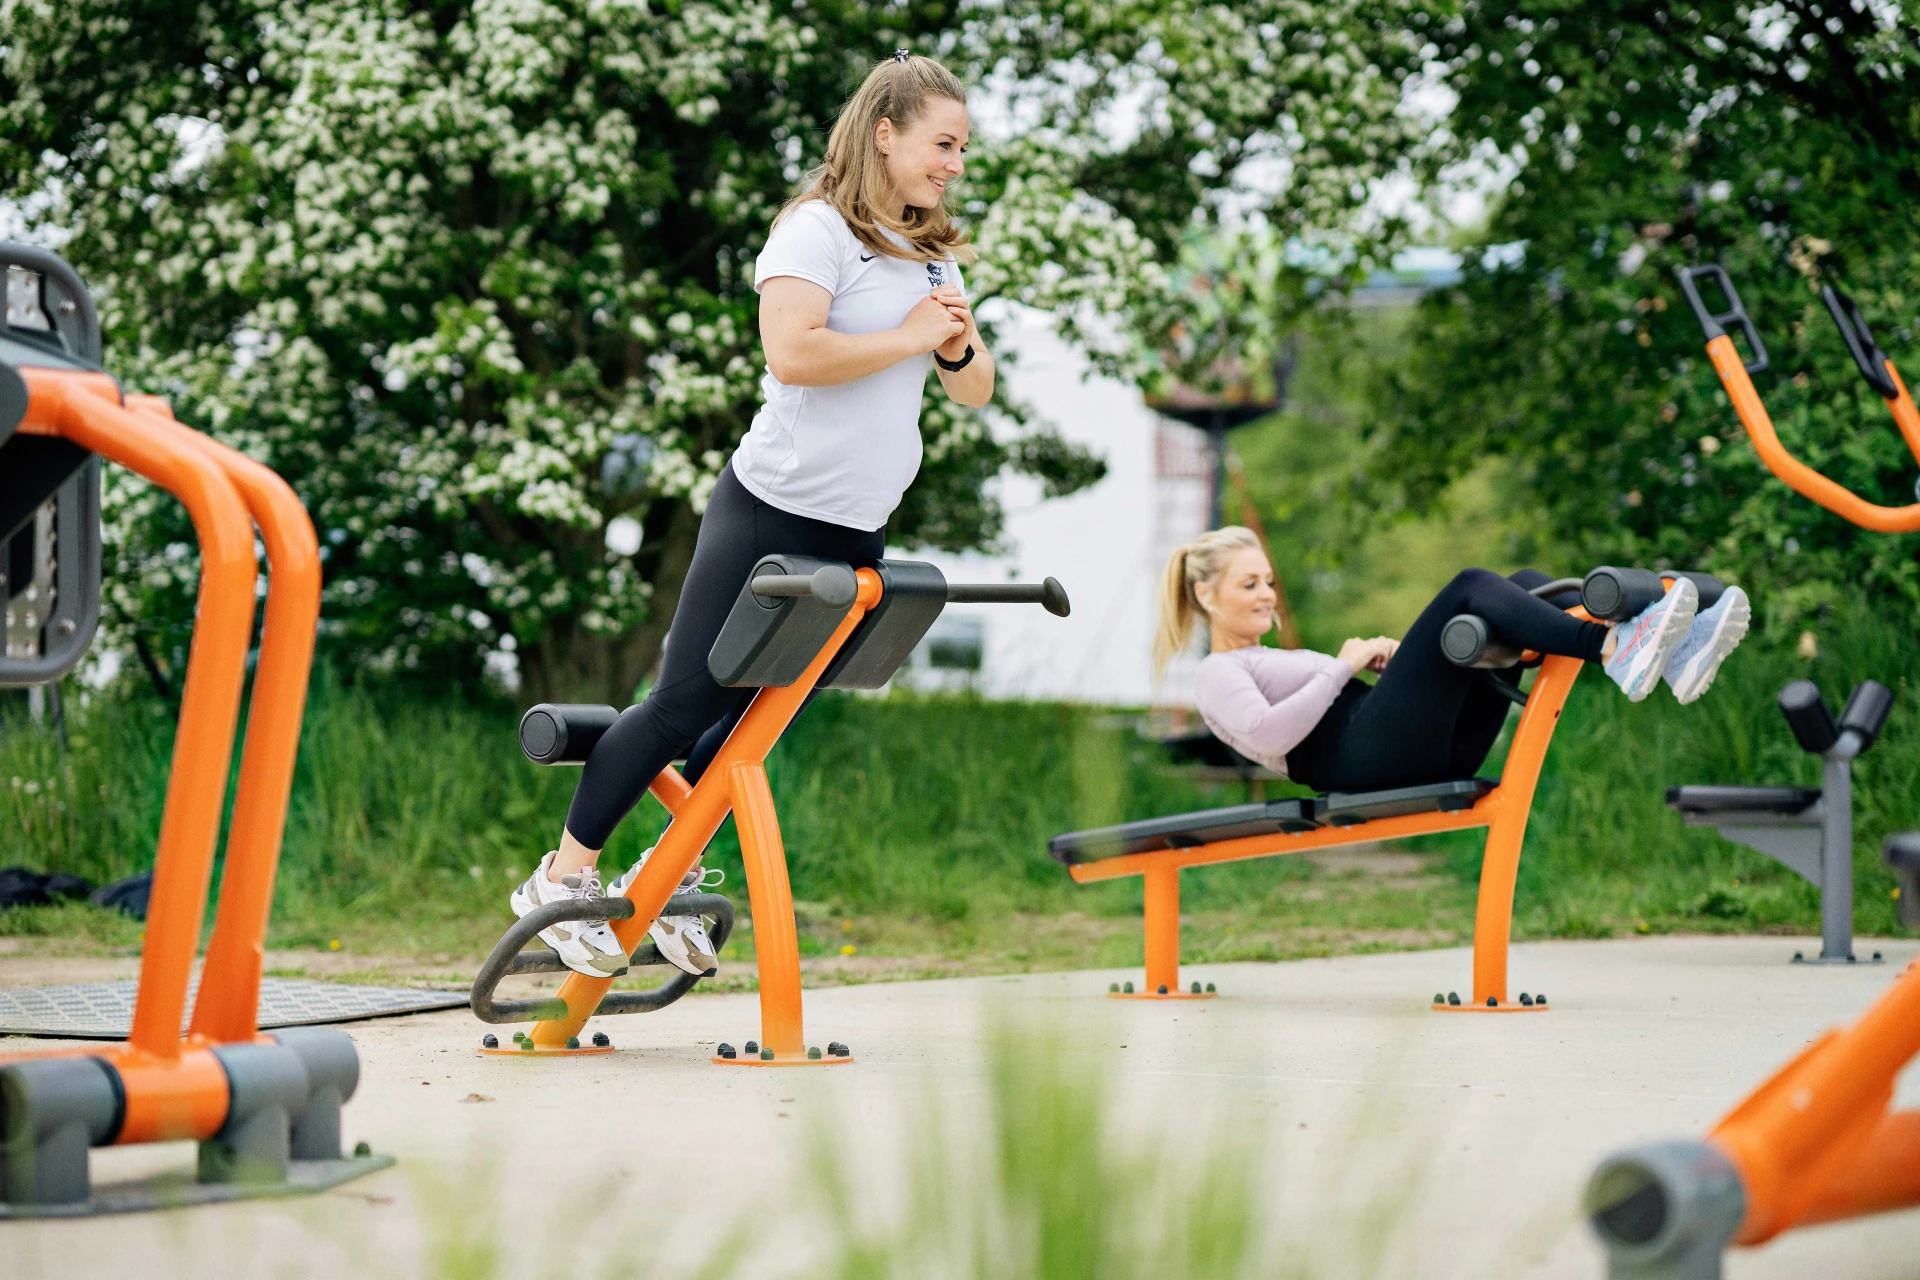 Two women working out on outdoor fitness equipment